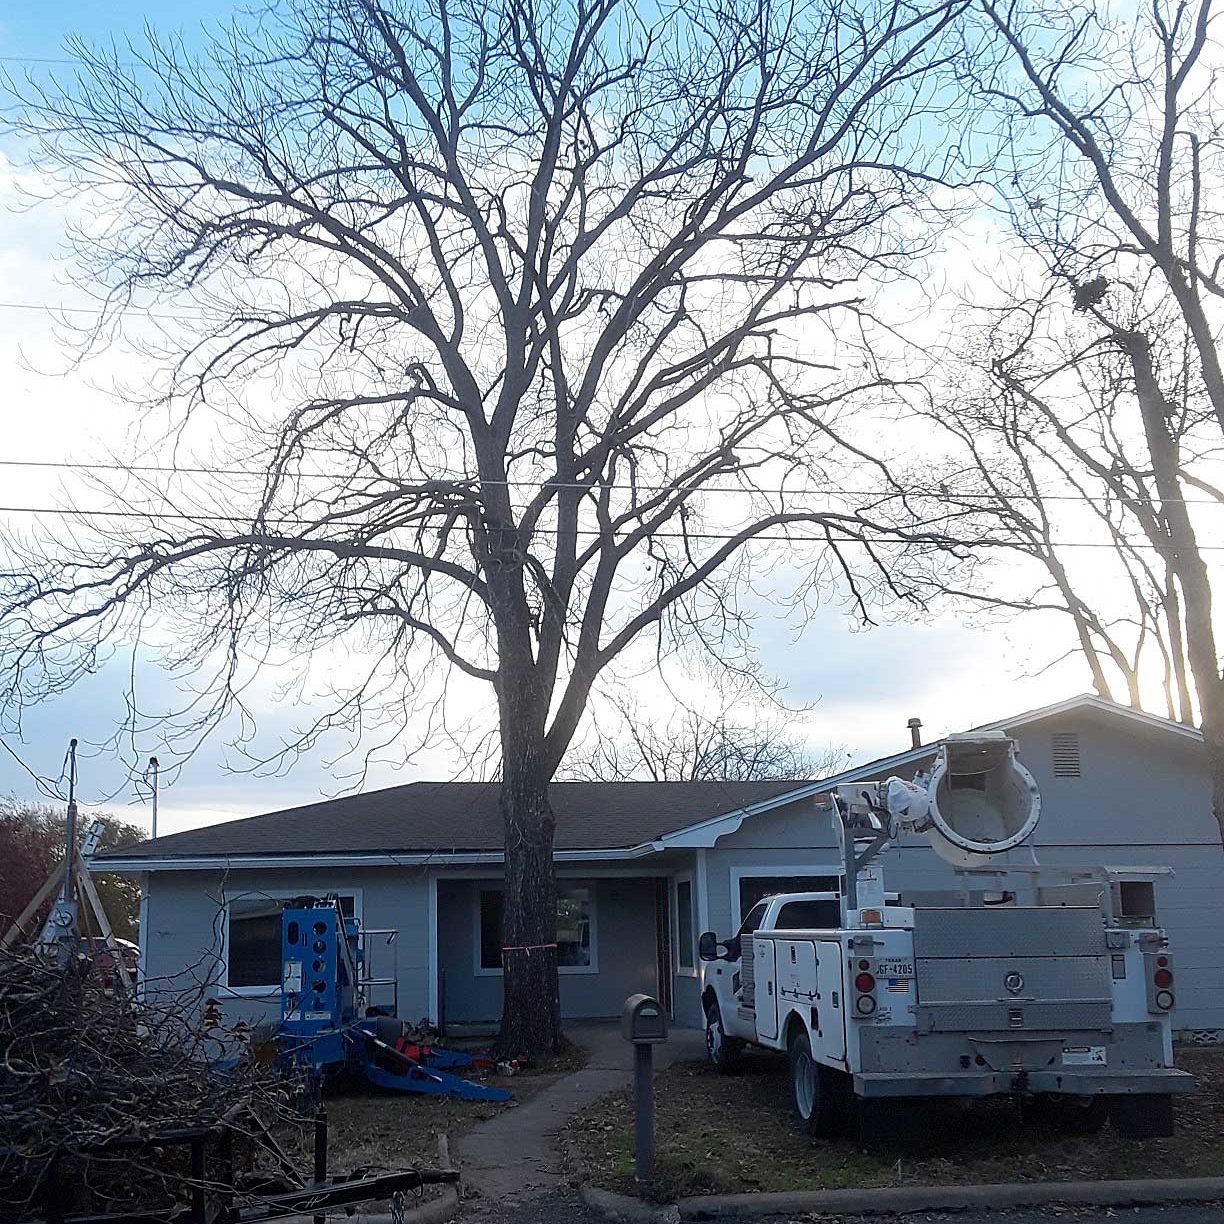 Tree removal near home - BEFORE